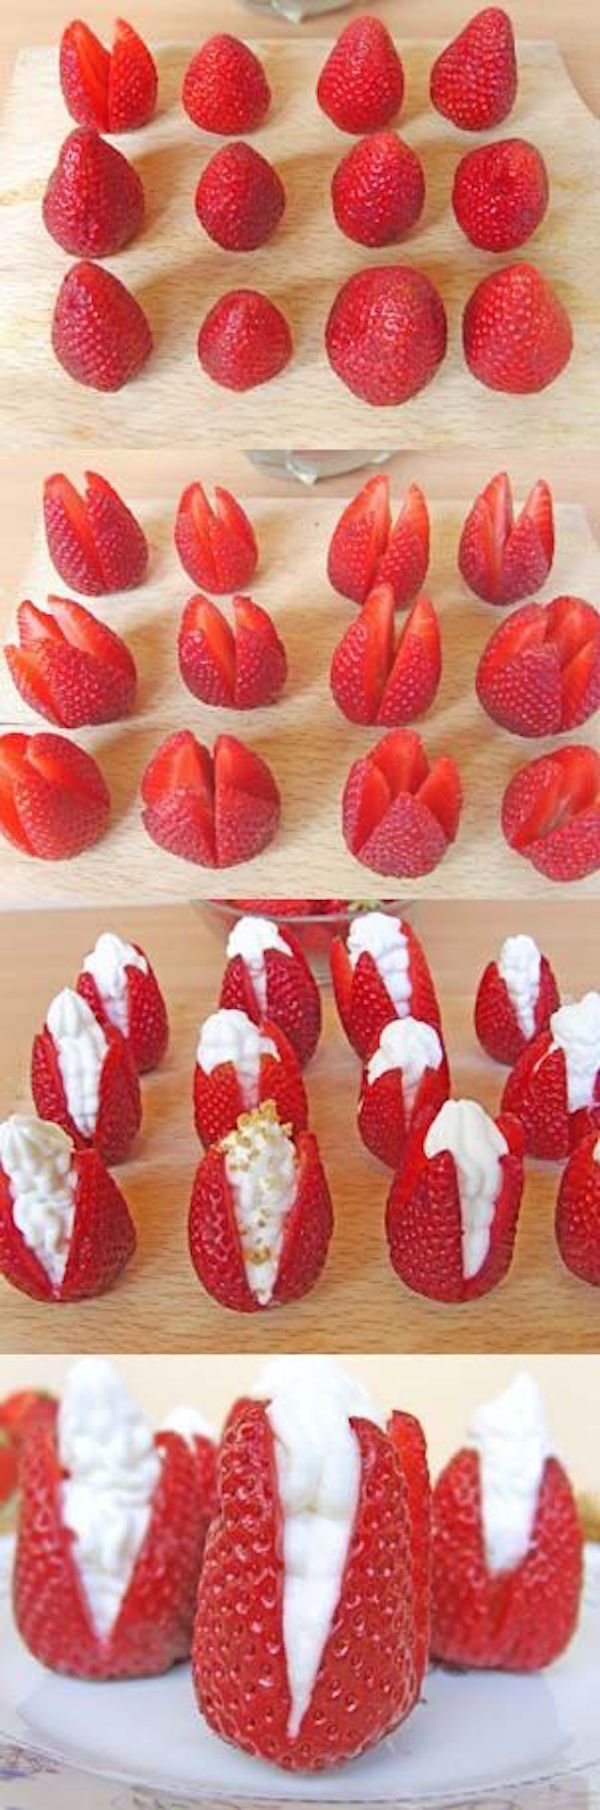 How to make cream filled strawberries